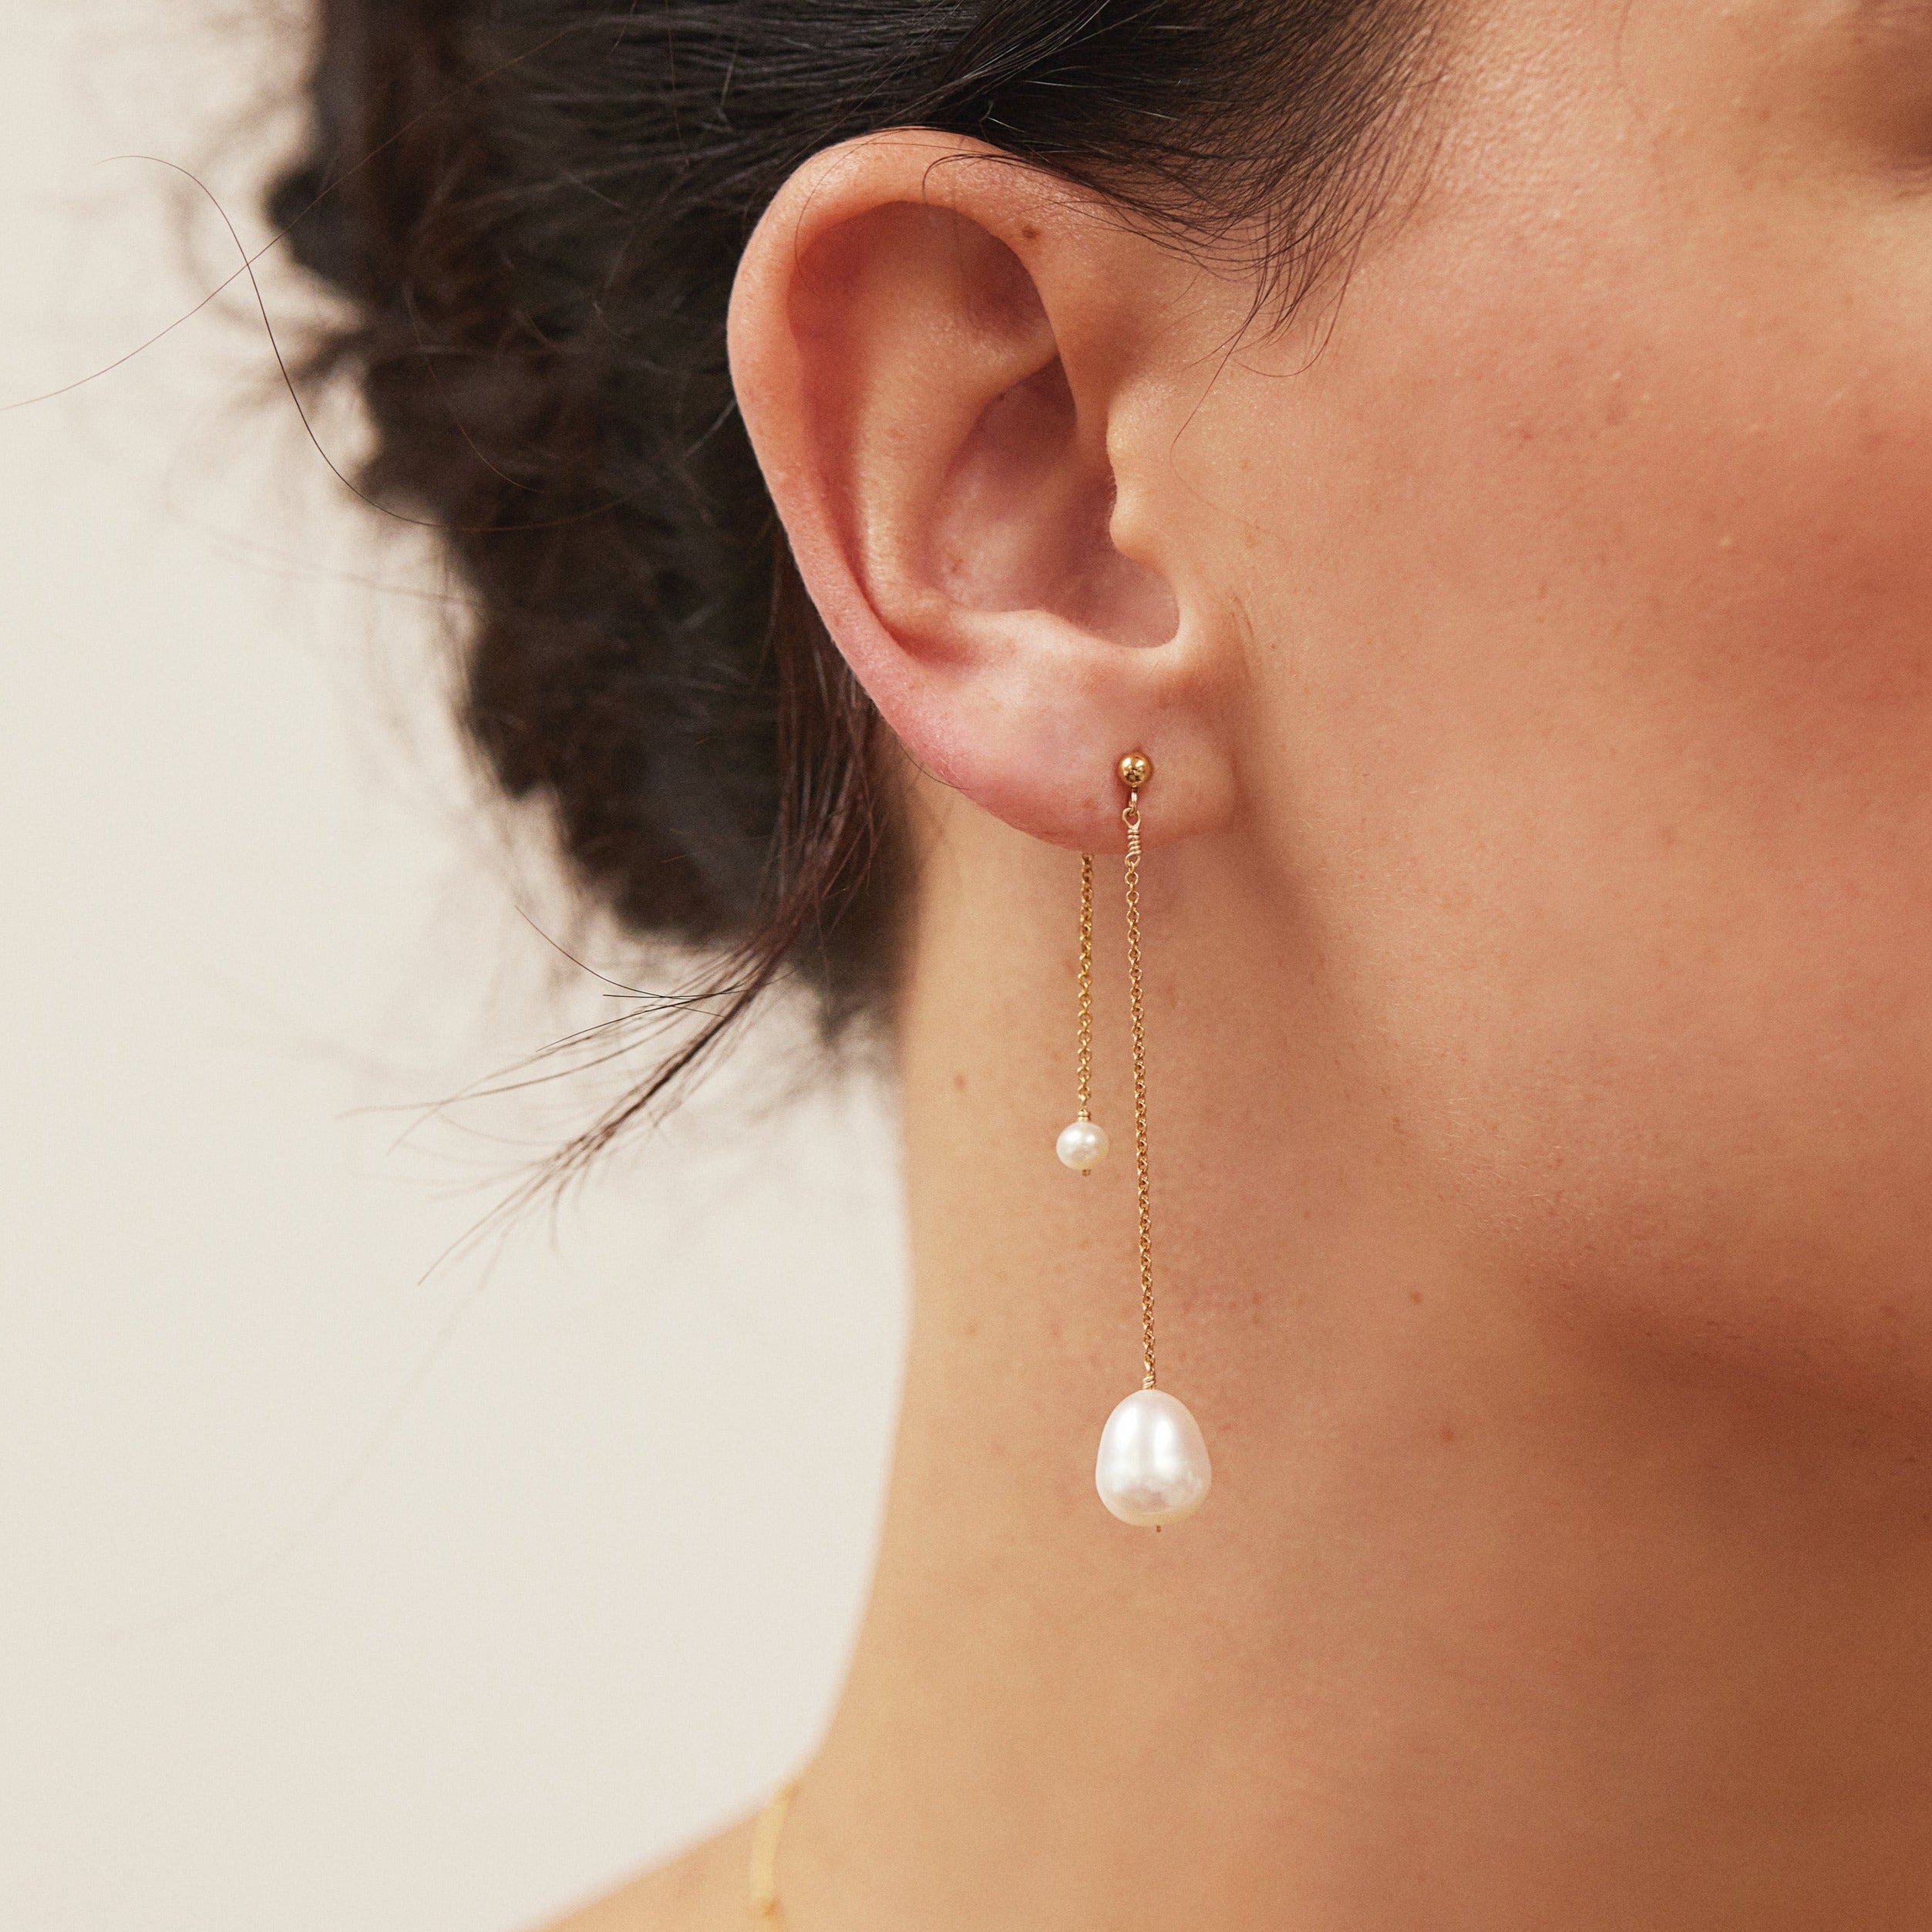 Gold layered large and small pearl earring in one ear lobe of a brunette woman 